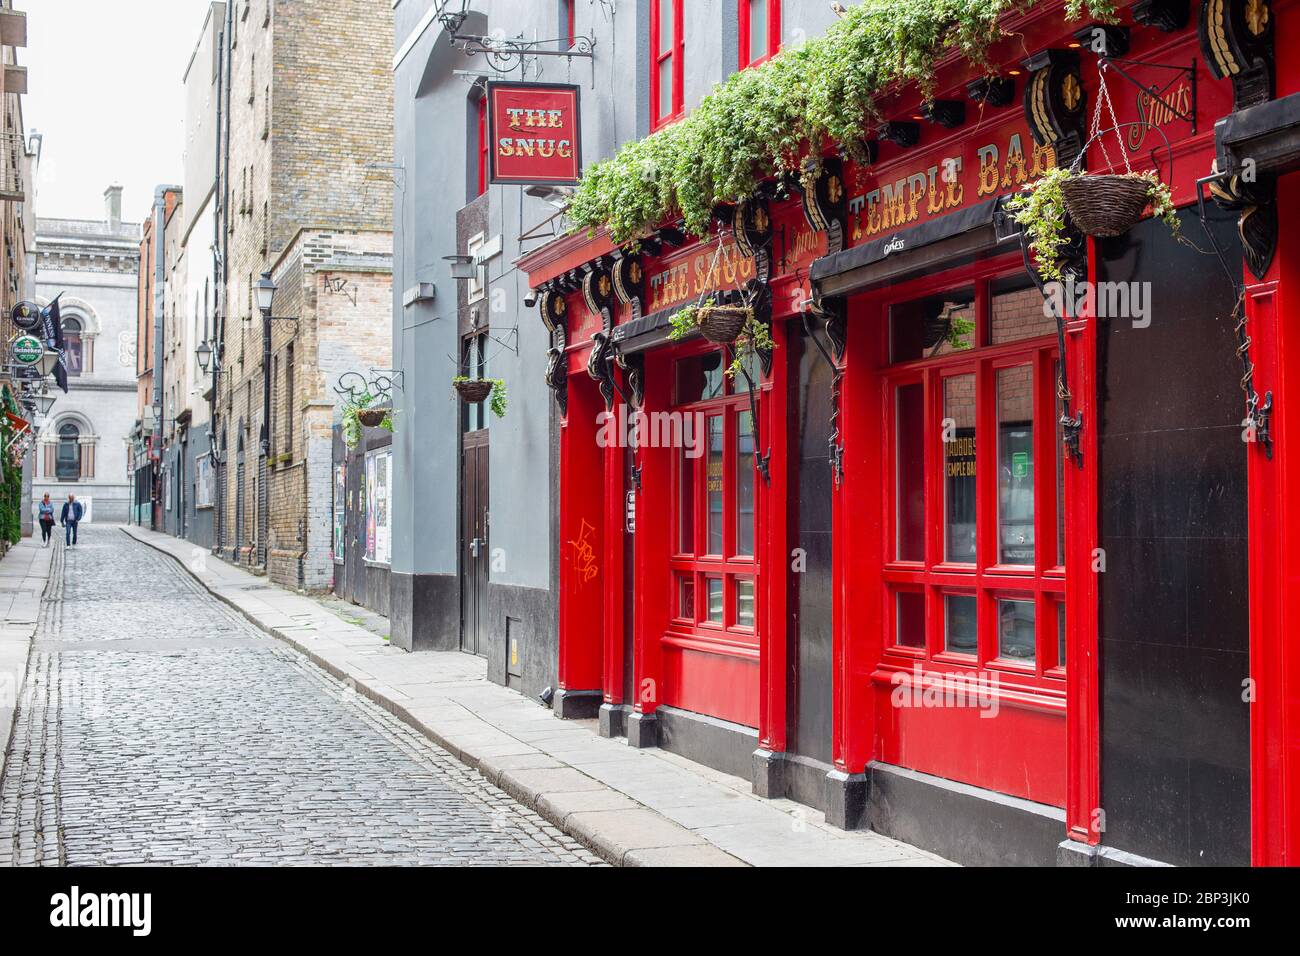 Dublin, Ireland. May 2020. Limited footfall and traffic in Dublin City Centre and shops and businesses closed due to Covid-19 pandemic restrictions. Stock Photo